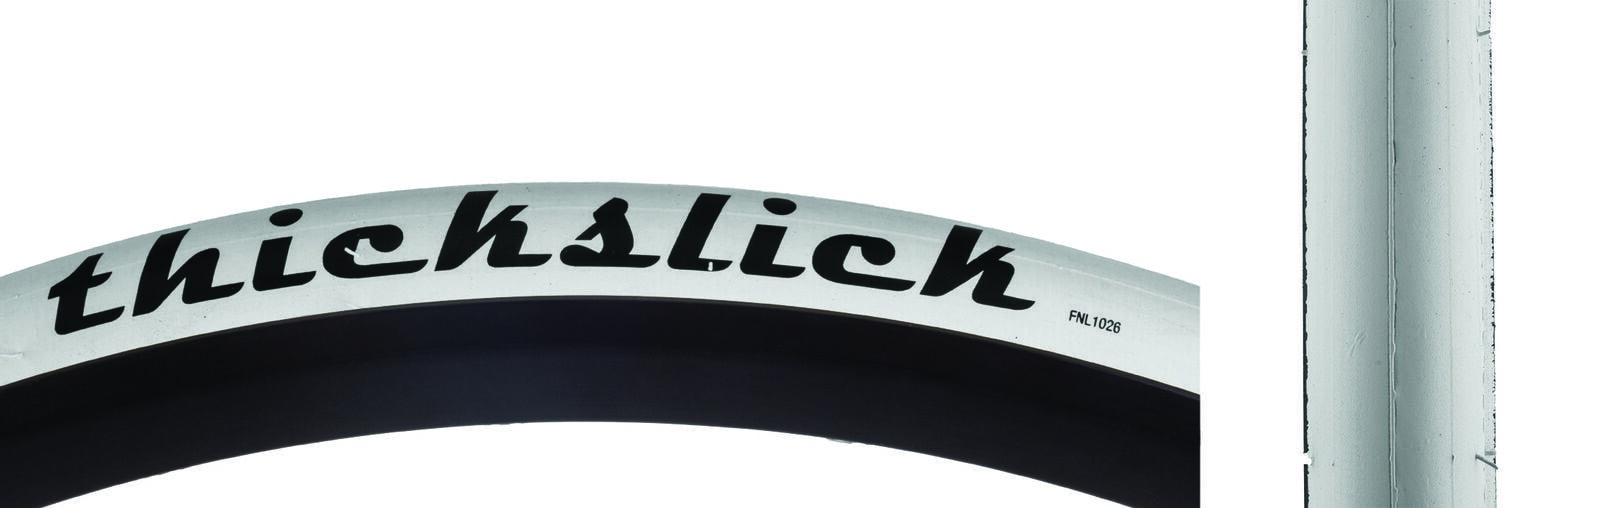 WTB ThickSlick Tire - 700 x 25, Clincher, Wire, White, Comp